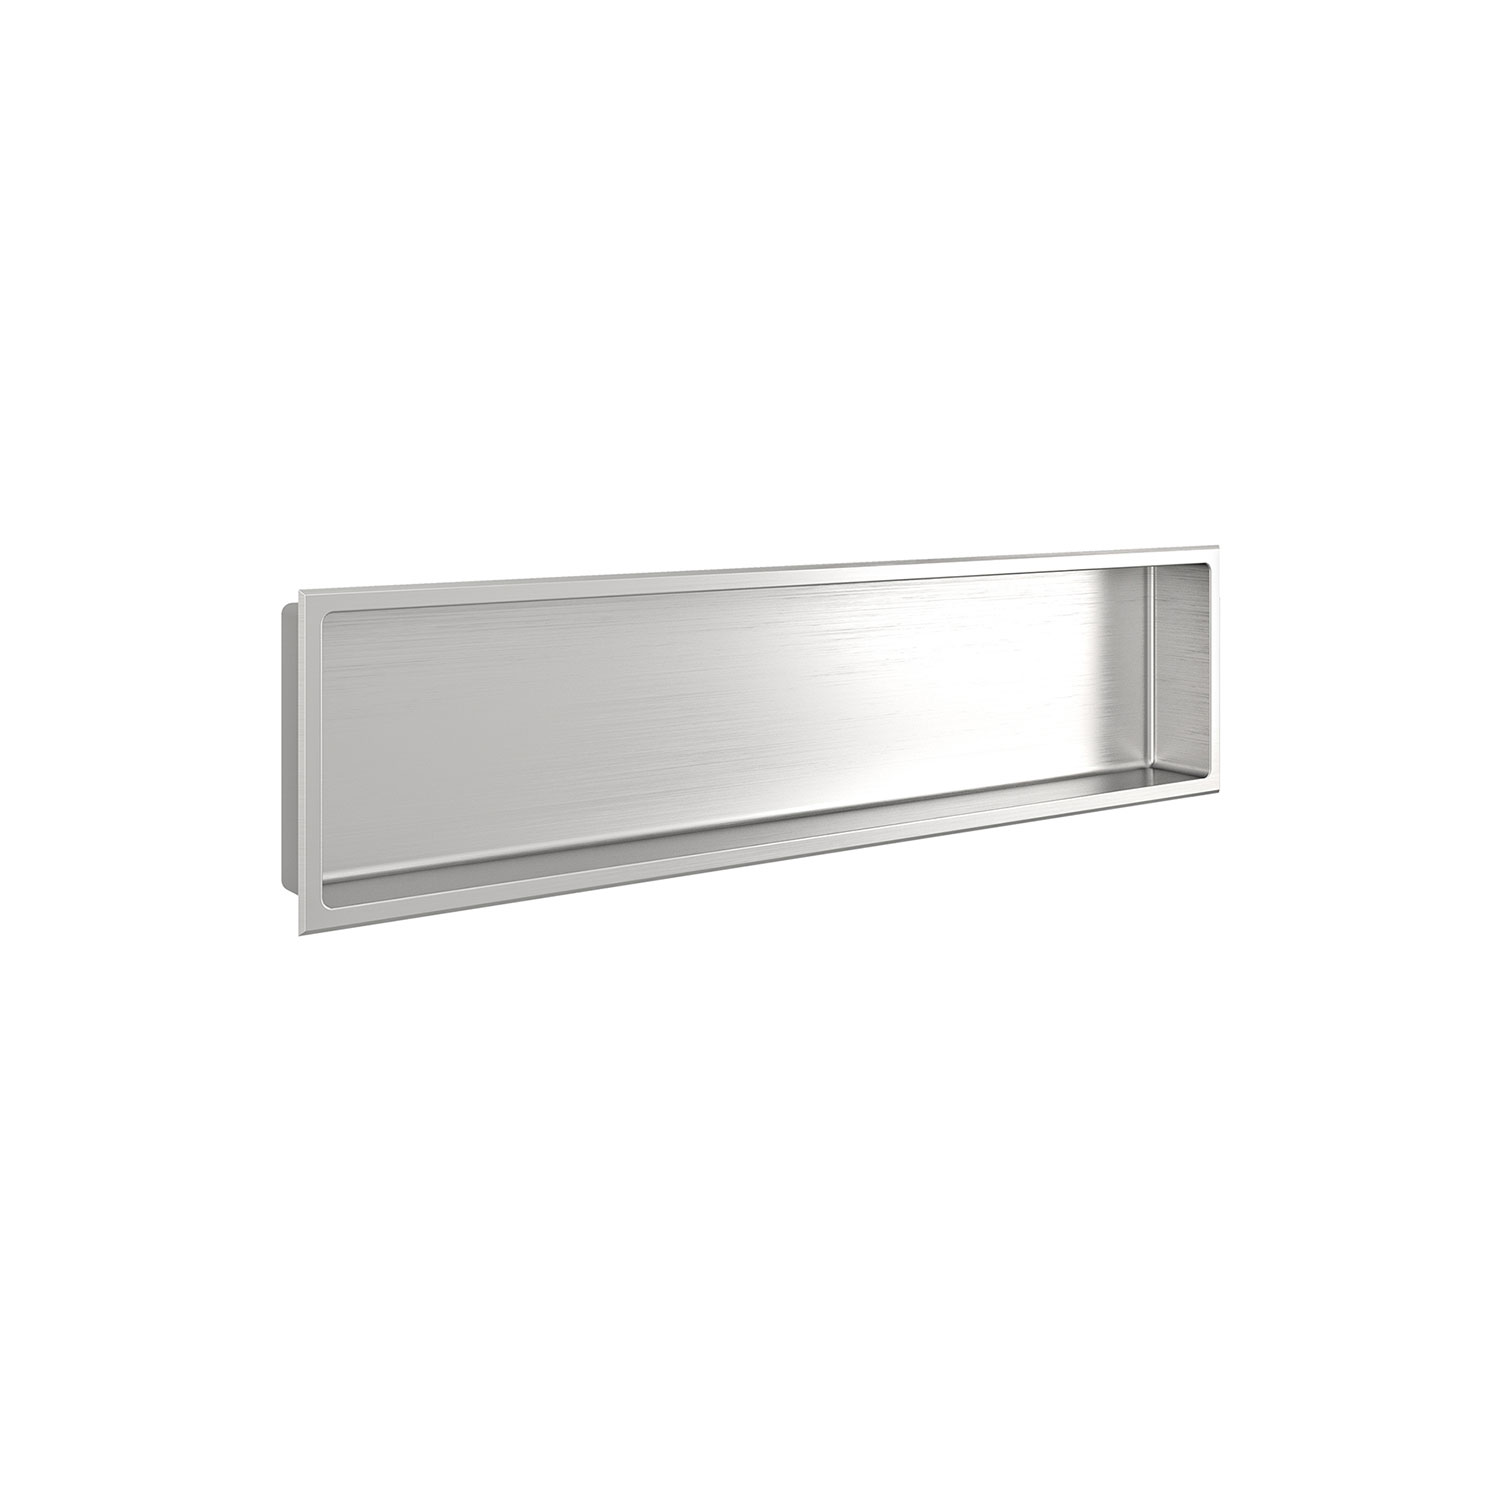 Brushed stainless steel niche 48